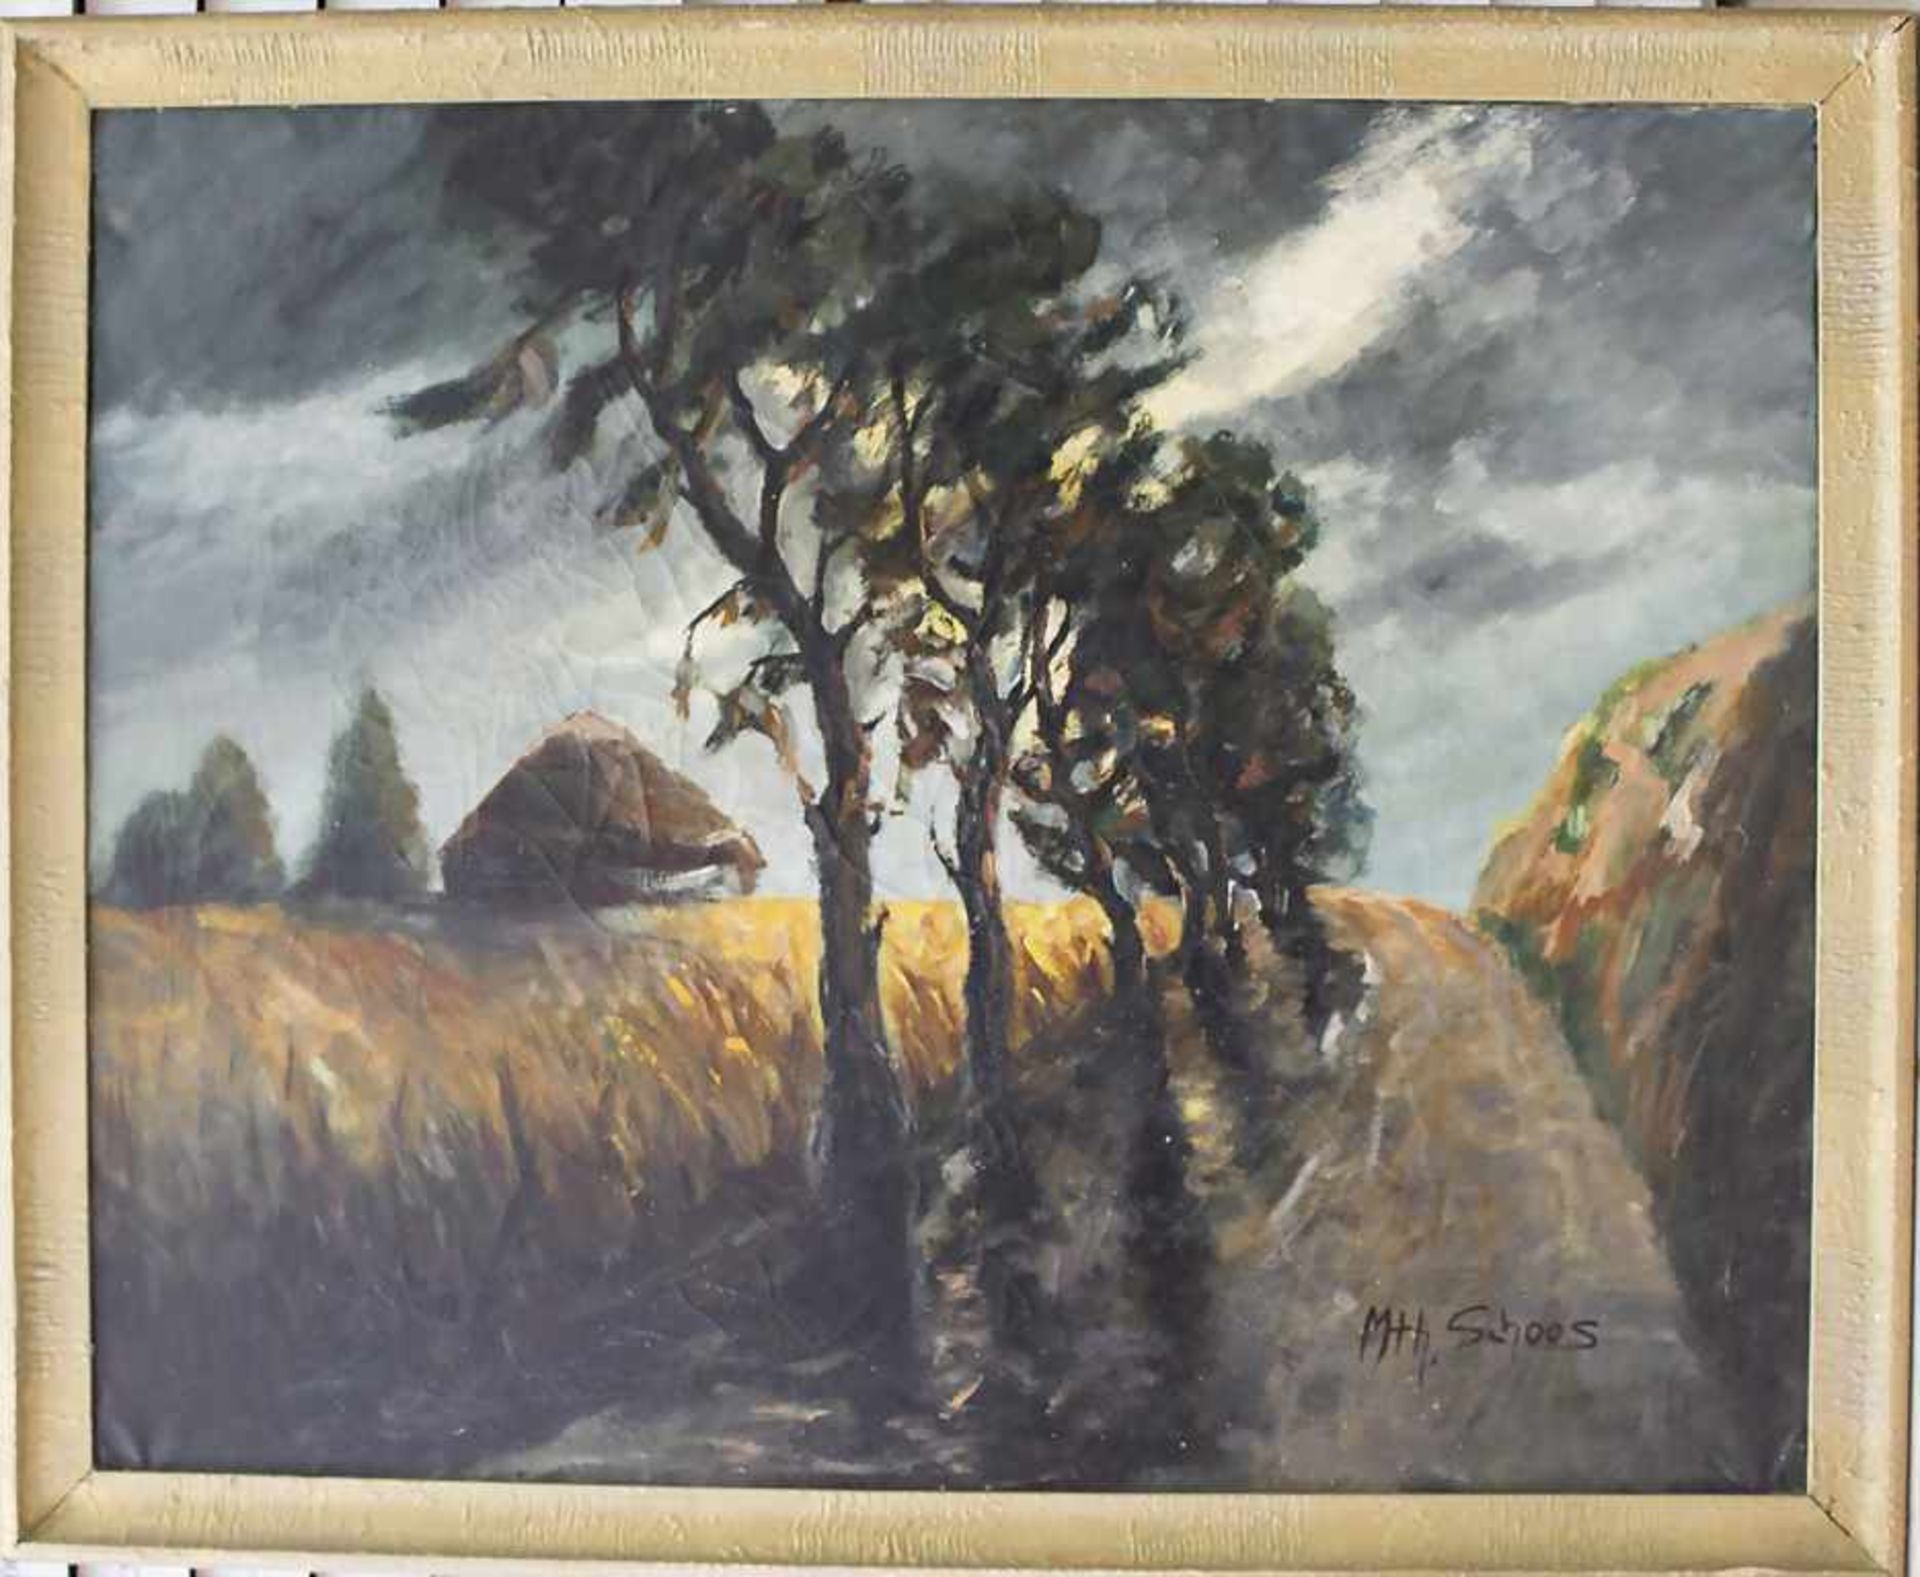 Mth. Schoos (20. Jh.), 'Kornfeld mit aufkommendem Gewitter' / 'A cornfield with upcoming storm' - Image 2 of 5